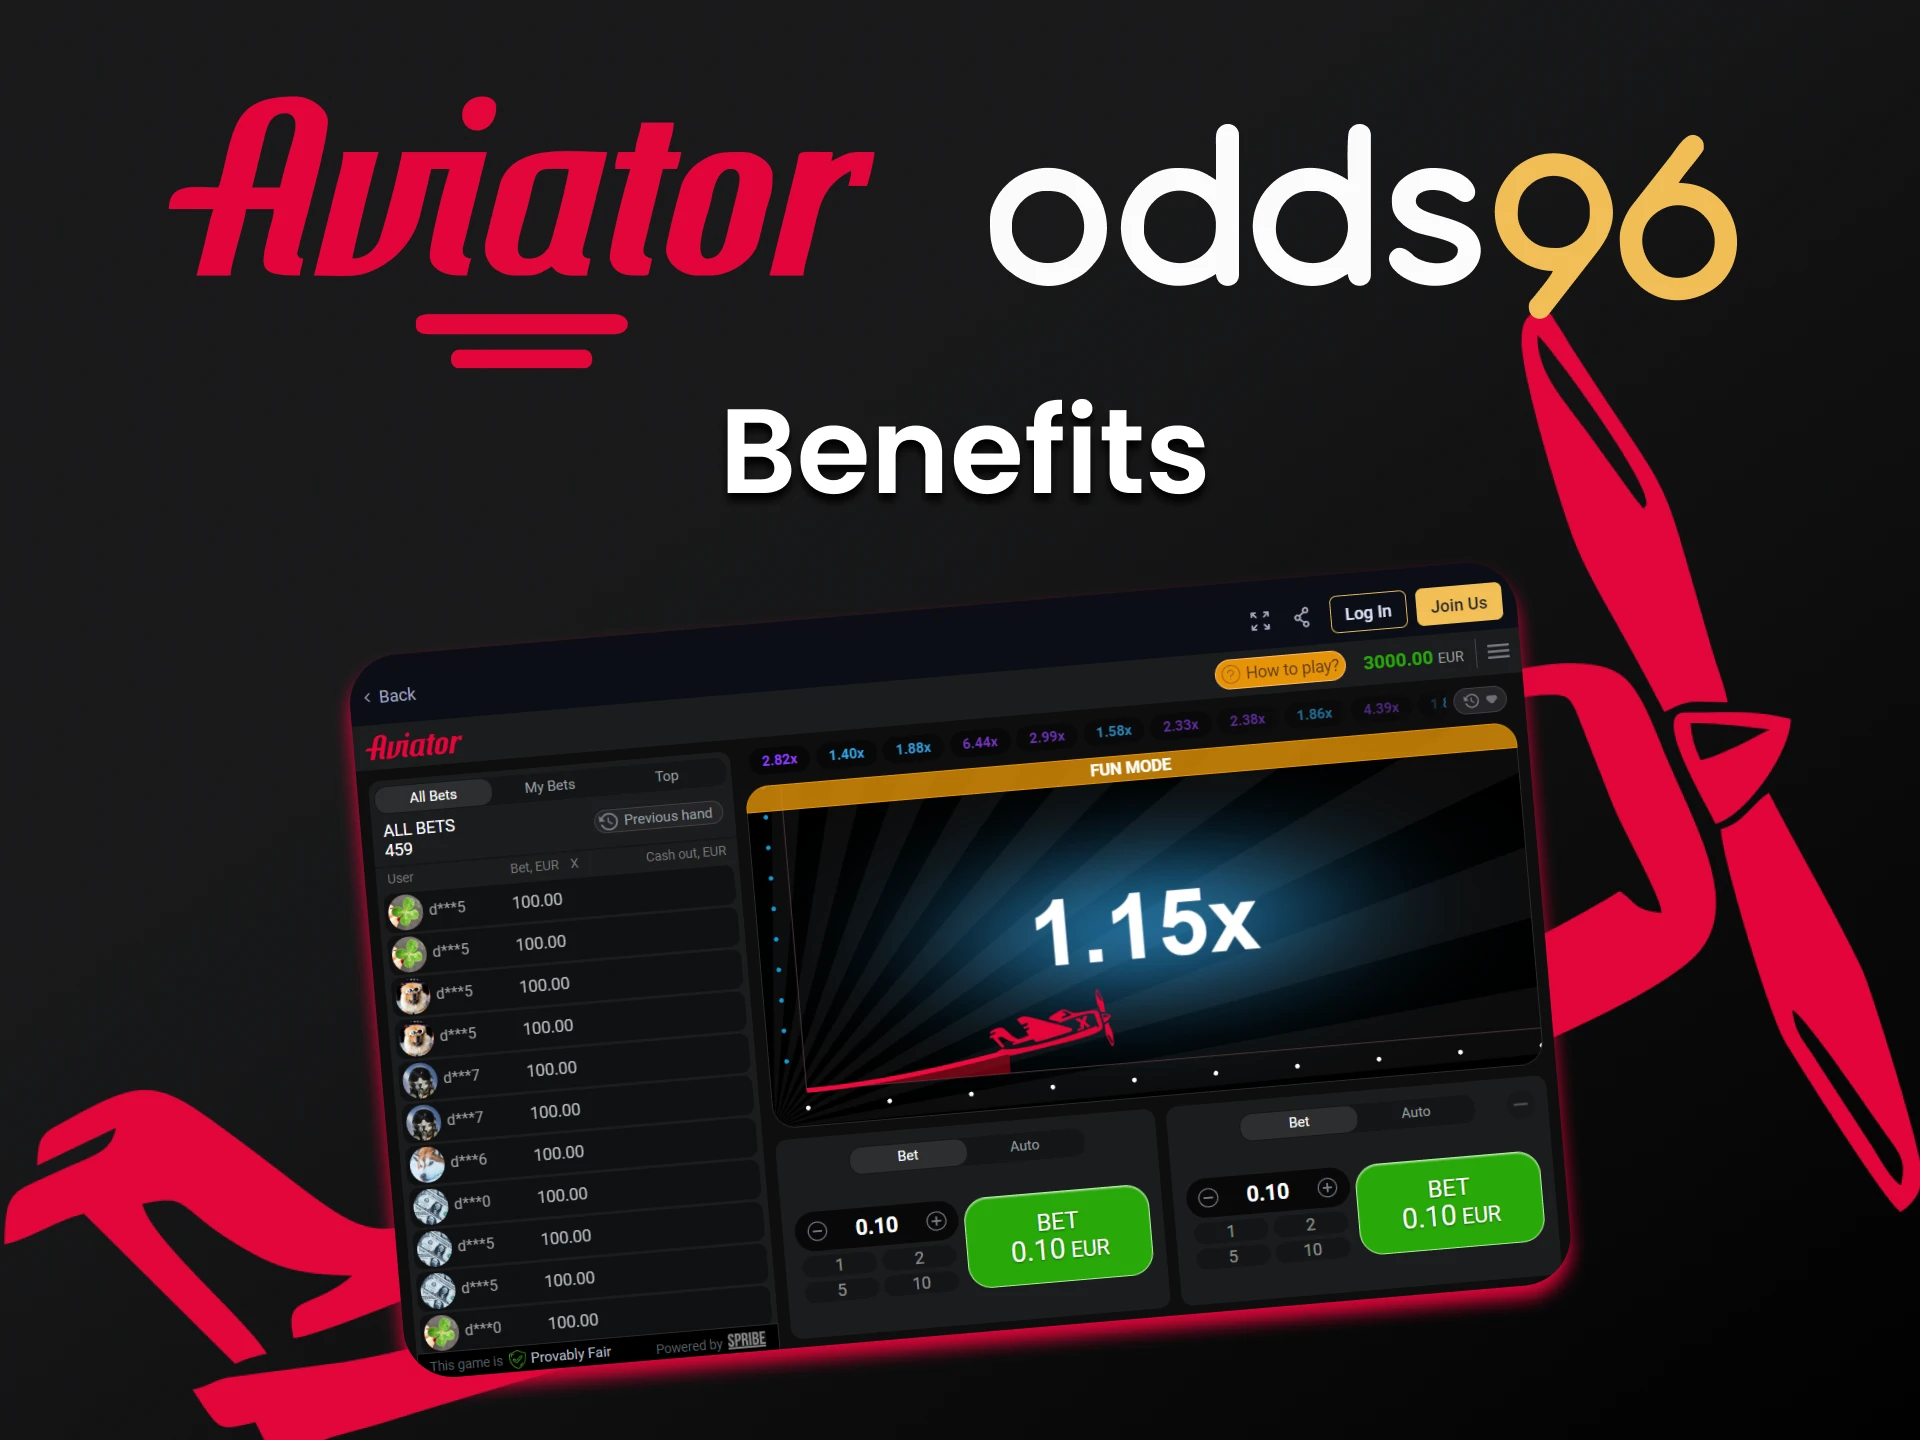 Find out why Odds96 is perfect for playing Aviator.